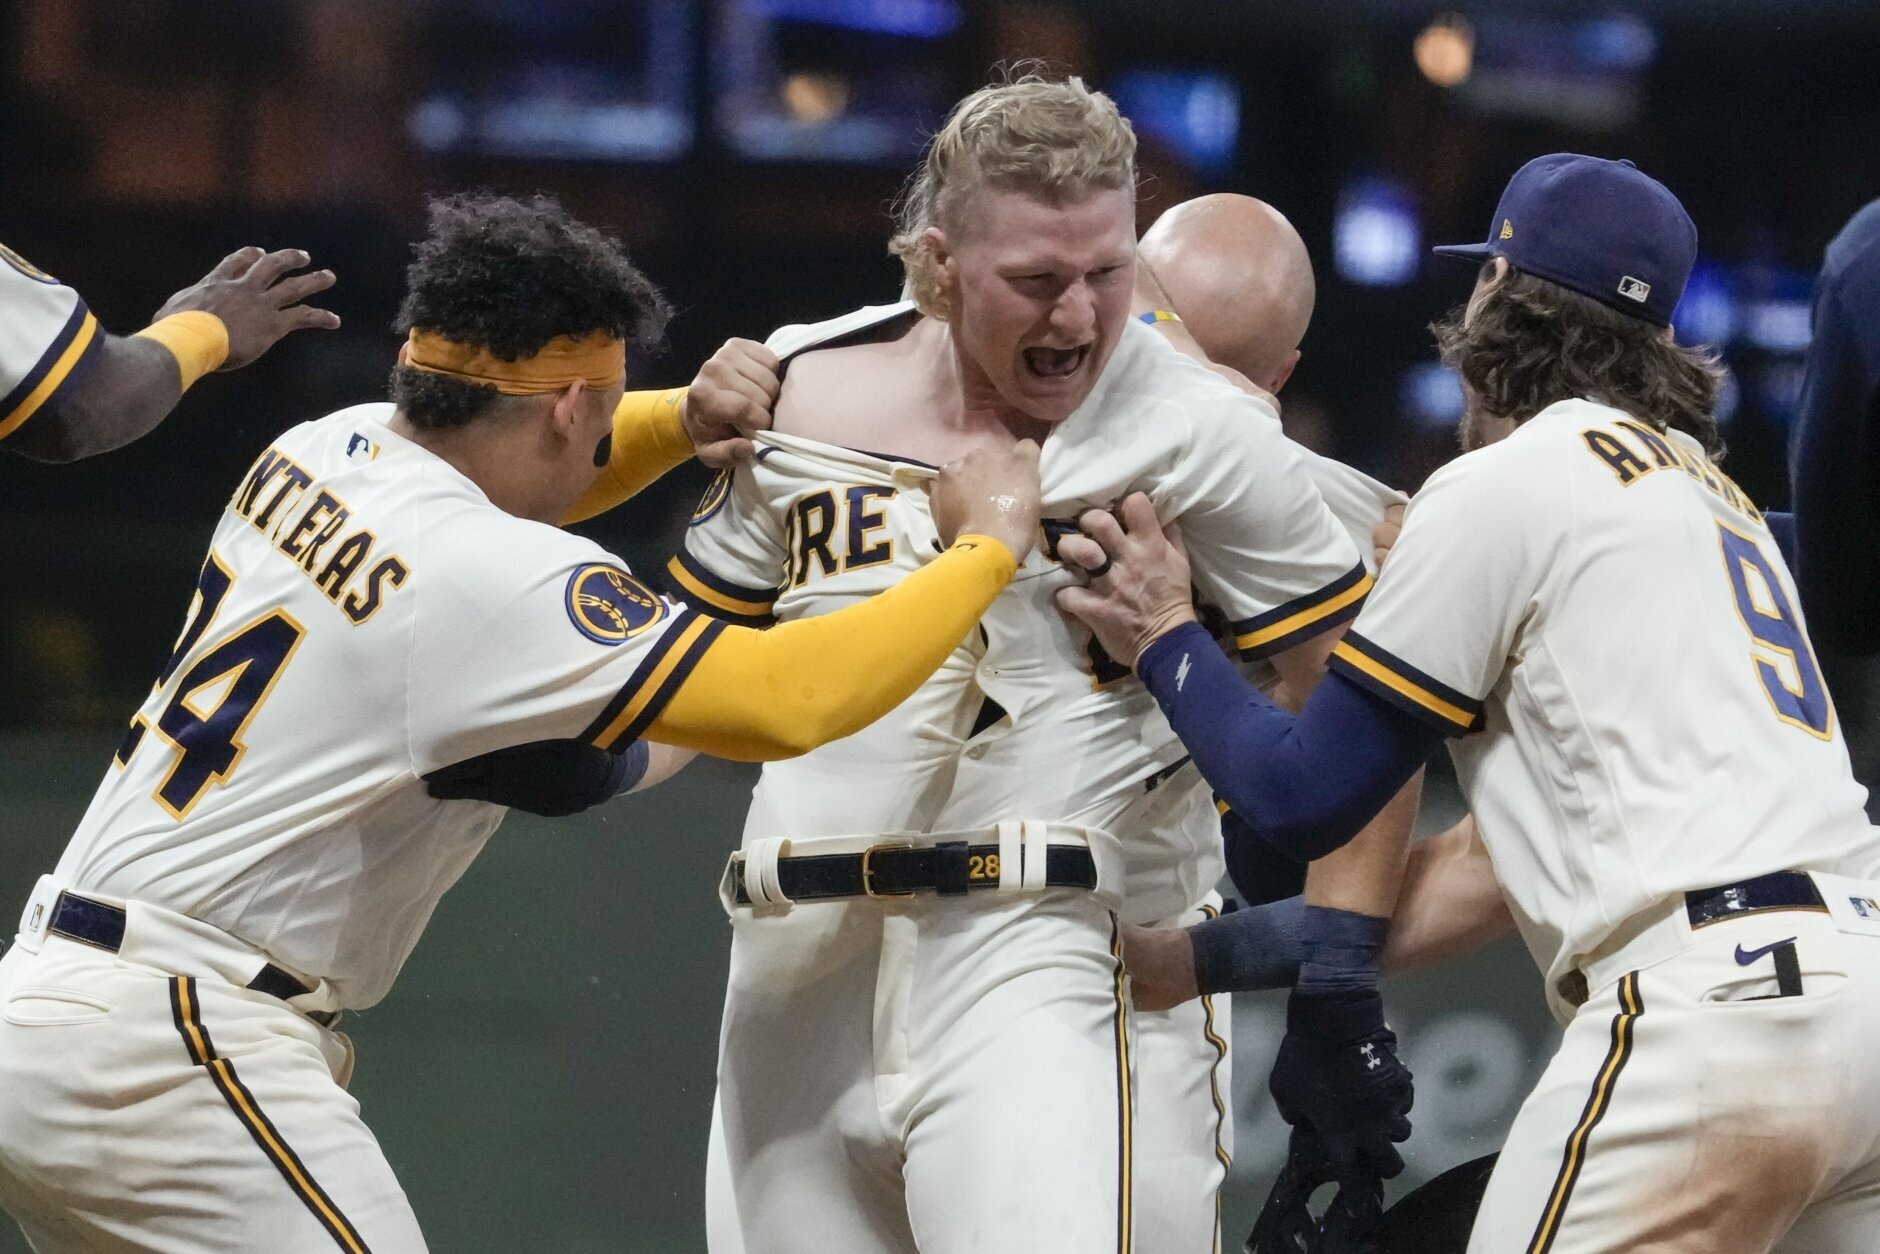 Joey Wiemer's 10th-inning single lifts Brewers over Orioles 4-3 - WTOP News